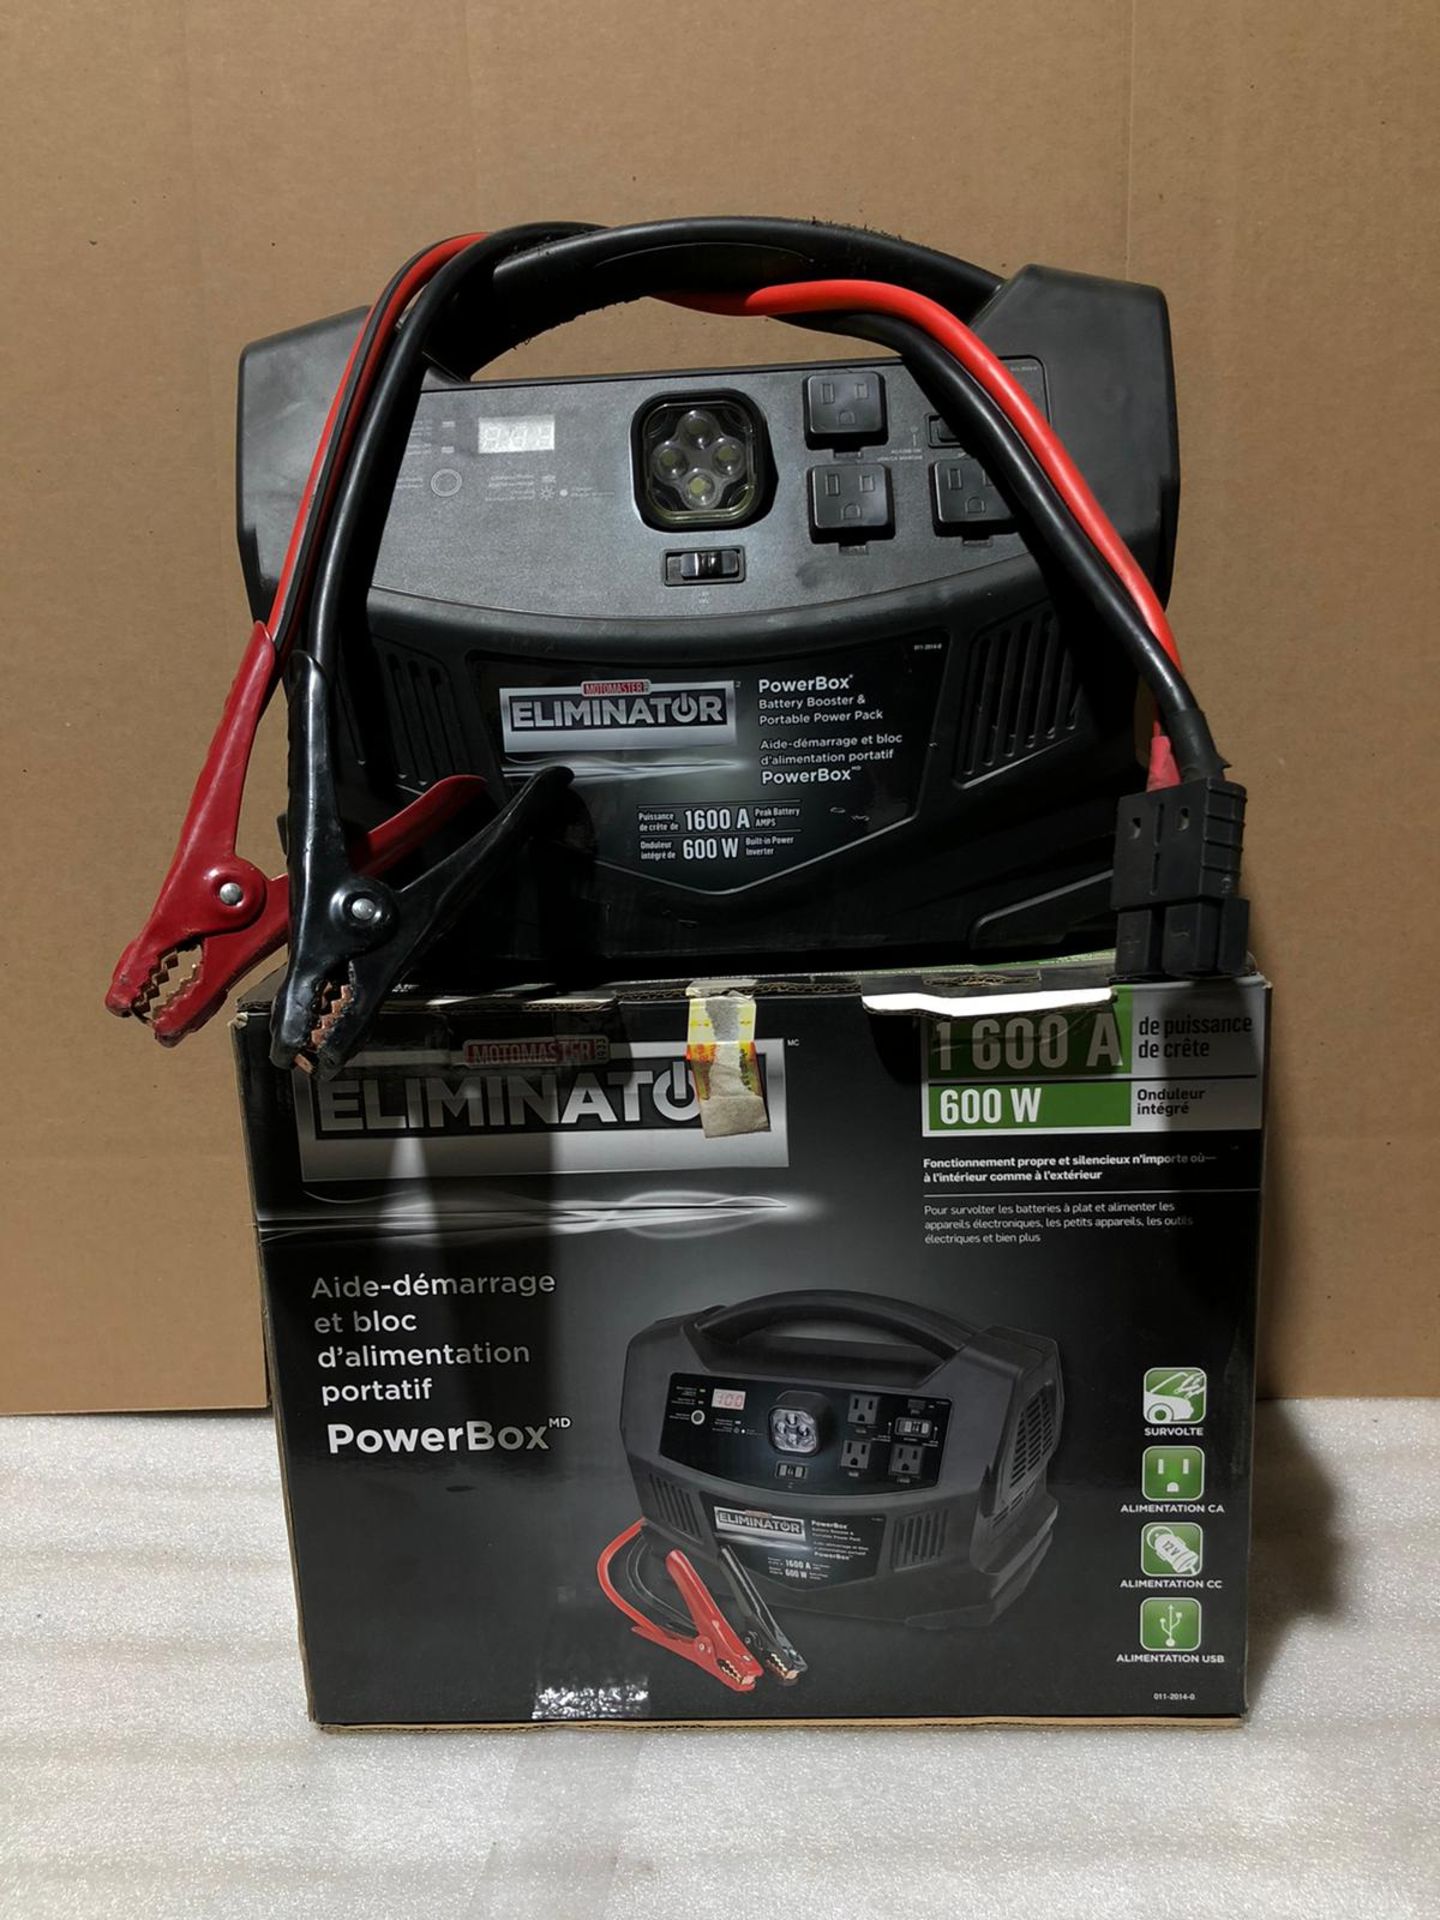 Eliminator Powerbox Battery Booster unit 1600A 600W portable power pack